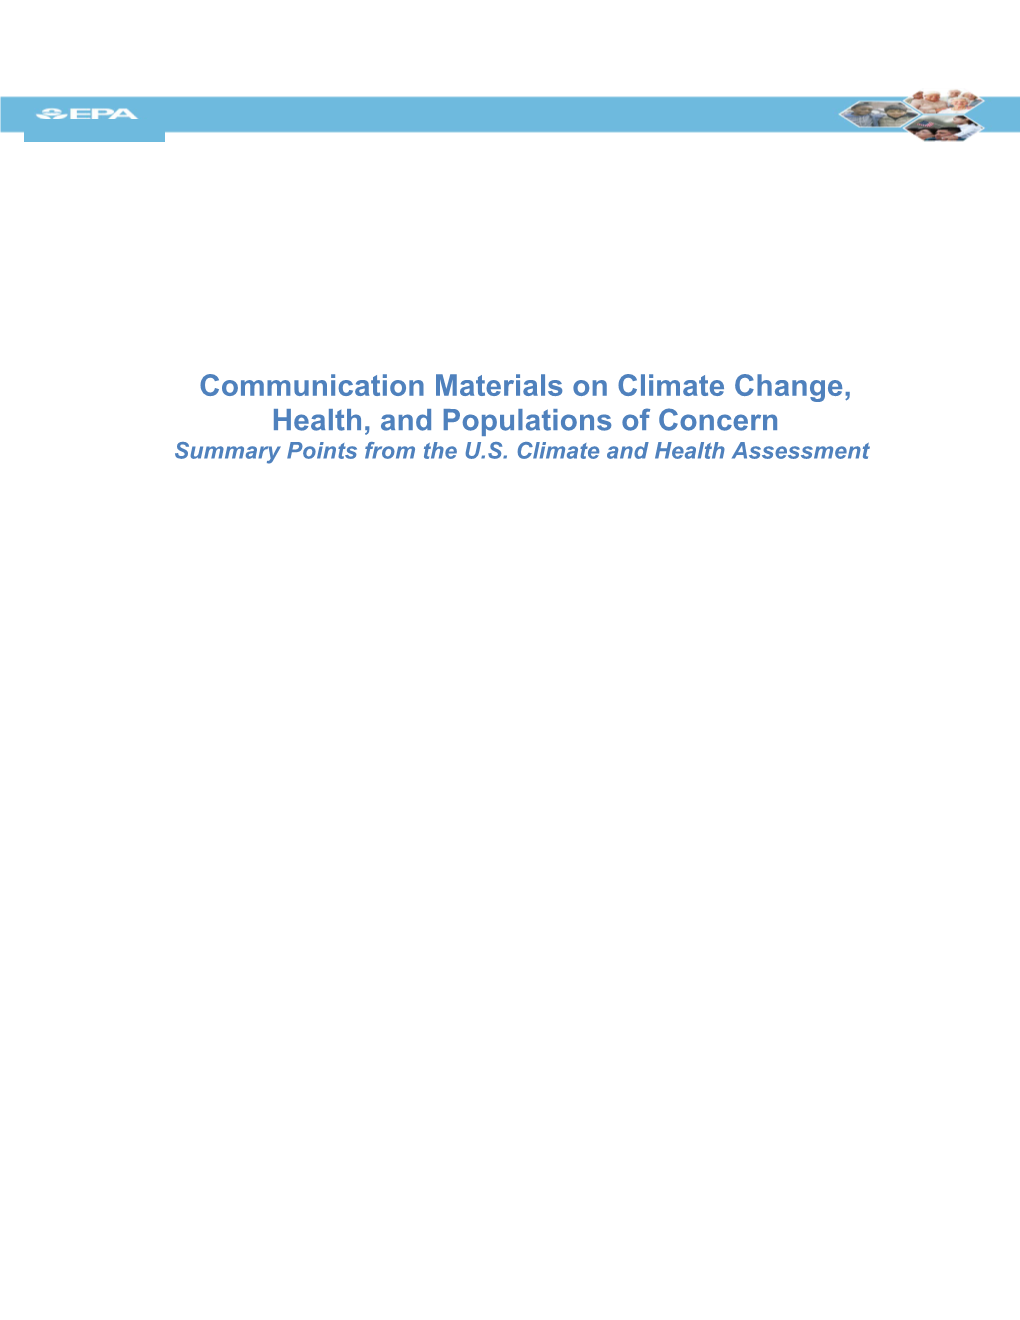 Communication Materials on Climate Change, Health, and Populations of Concern